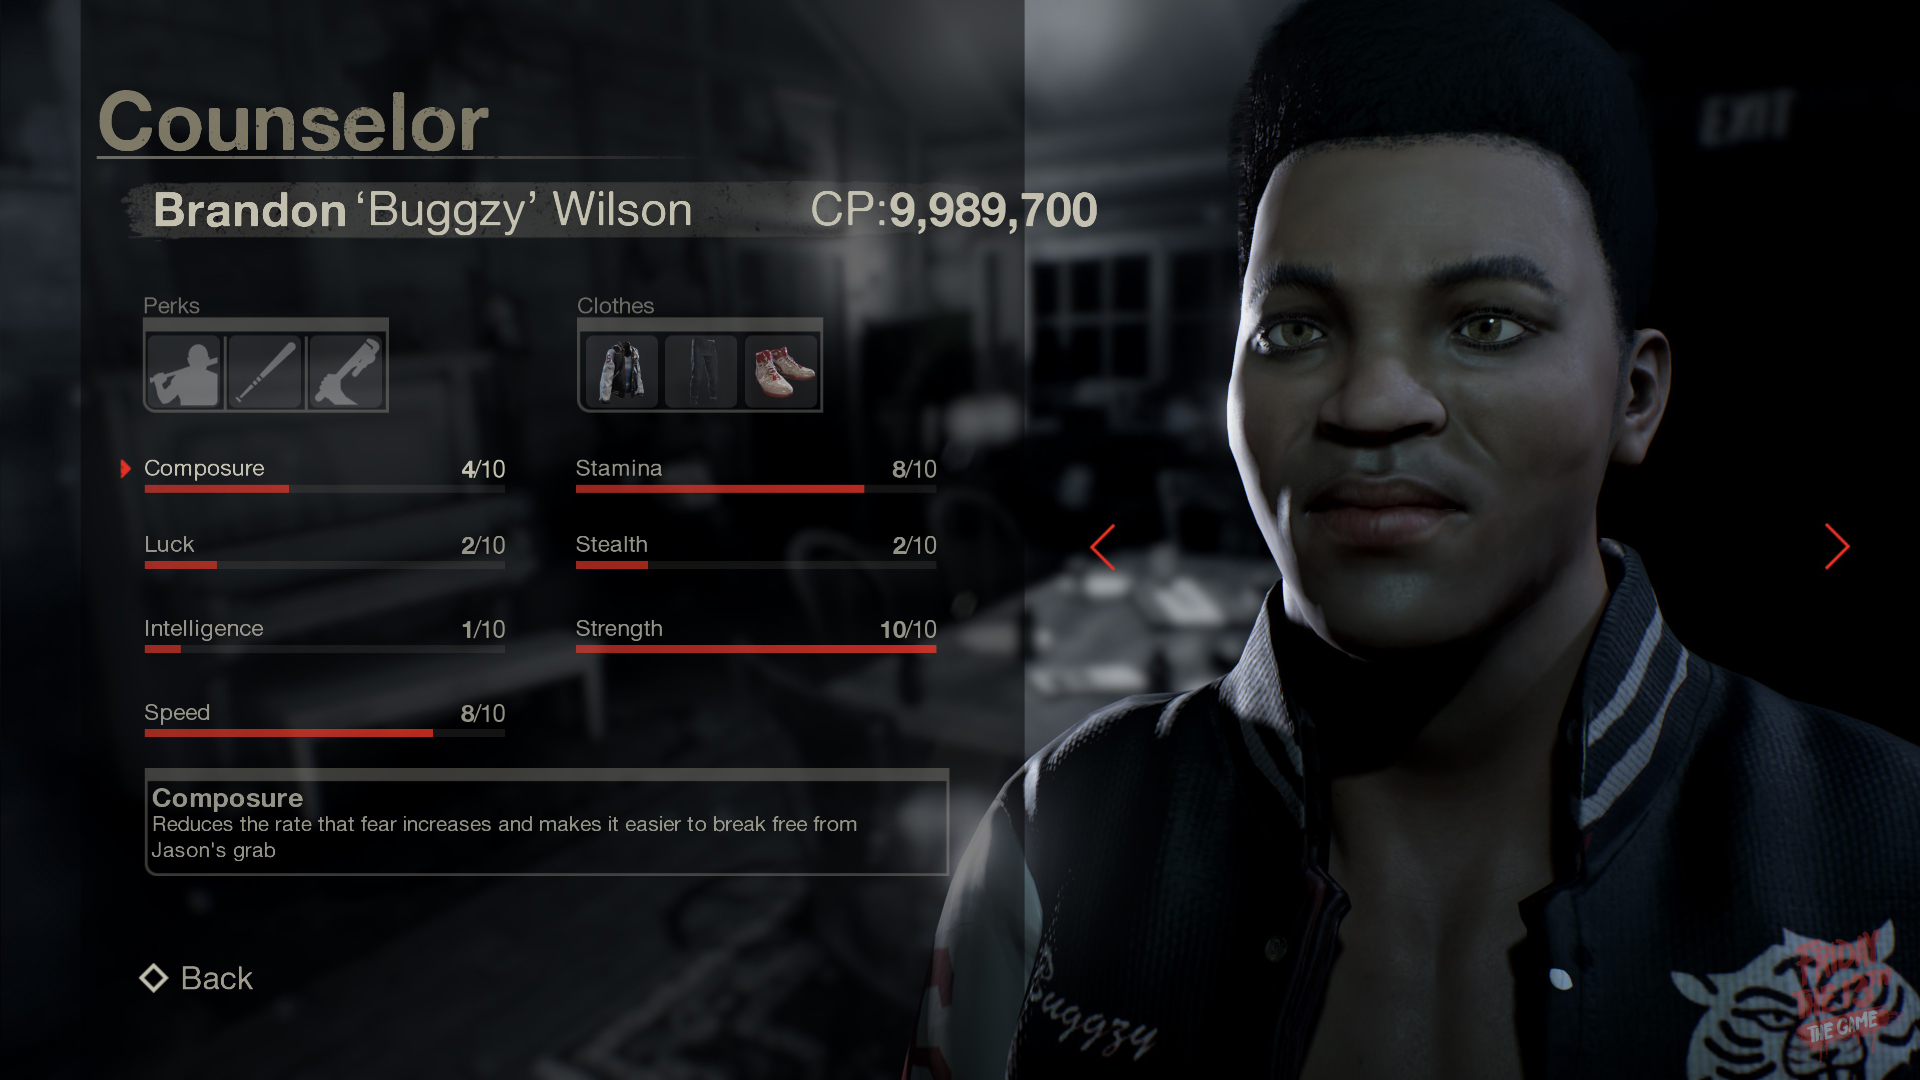 Friday The 13th: The Game - Counselor: Brandon 'Buggzy' Wilson.